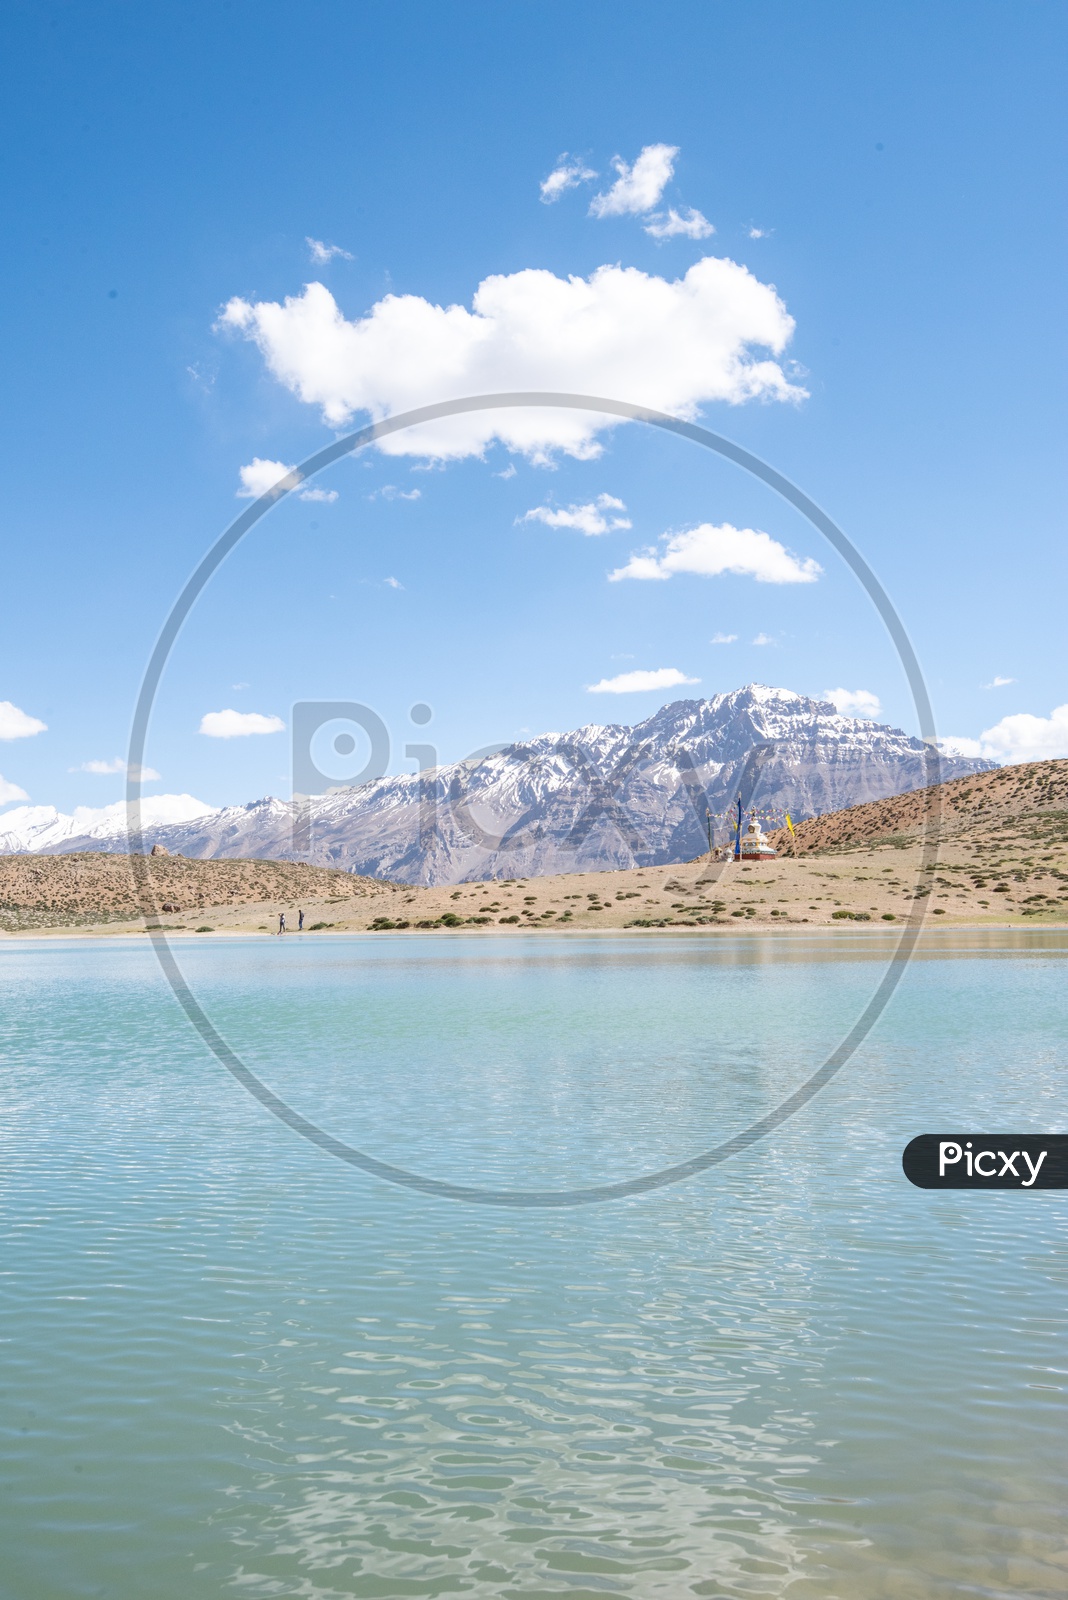 Dhankar lake with snow clad mountains in the background